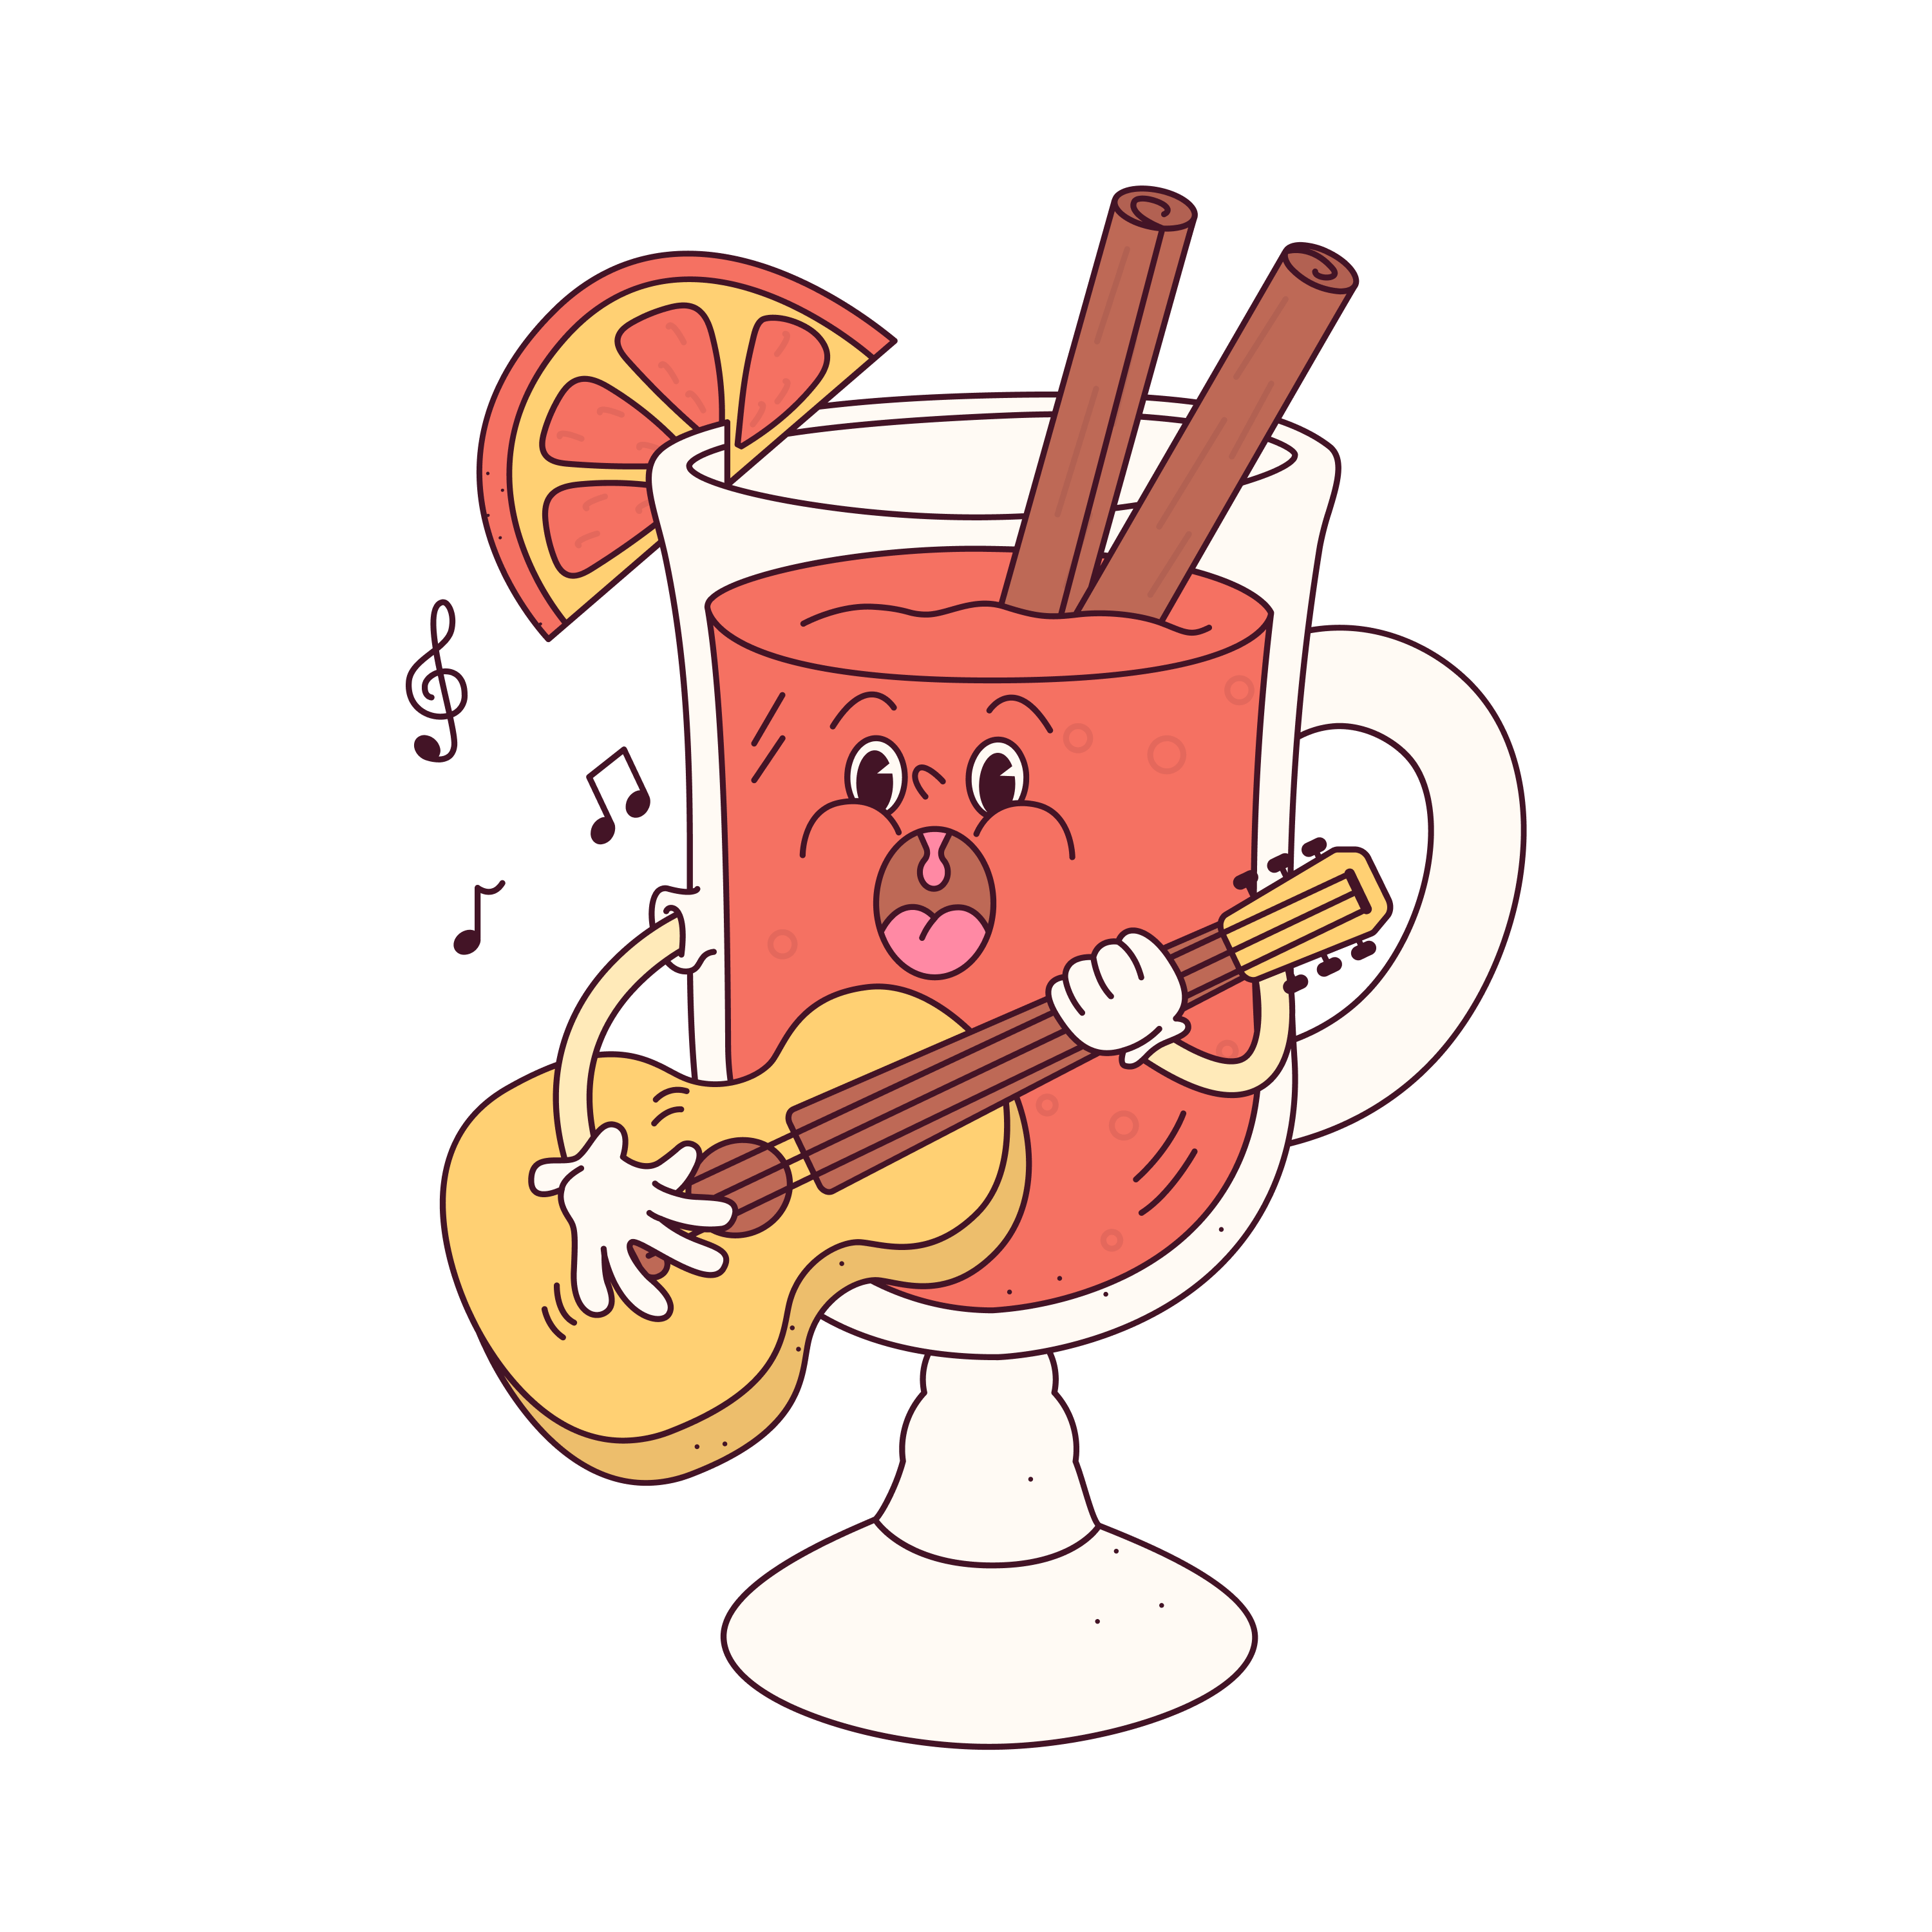 retro style illustration of a cocktail playing a guitar.